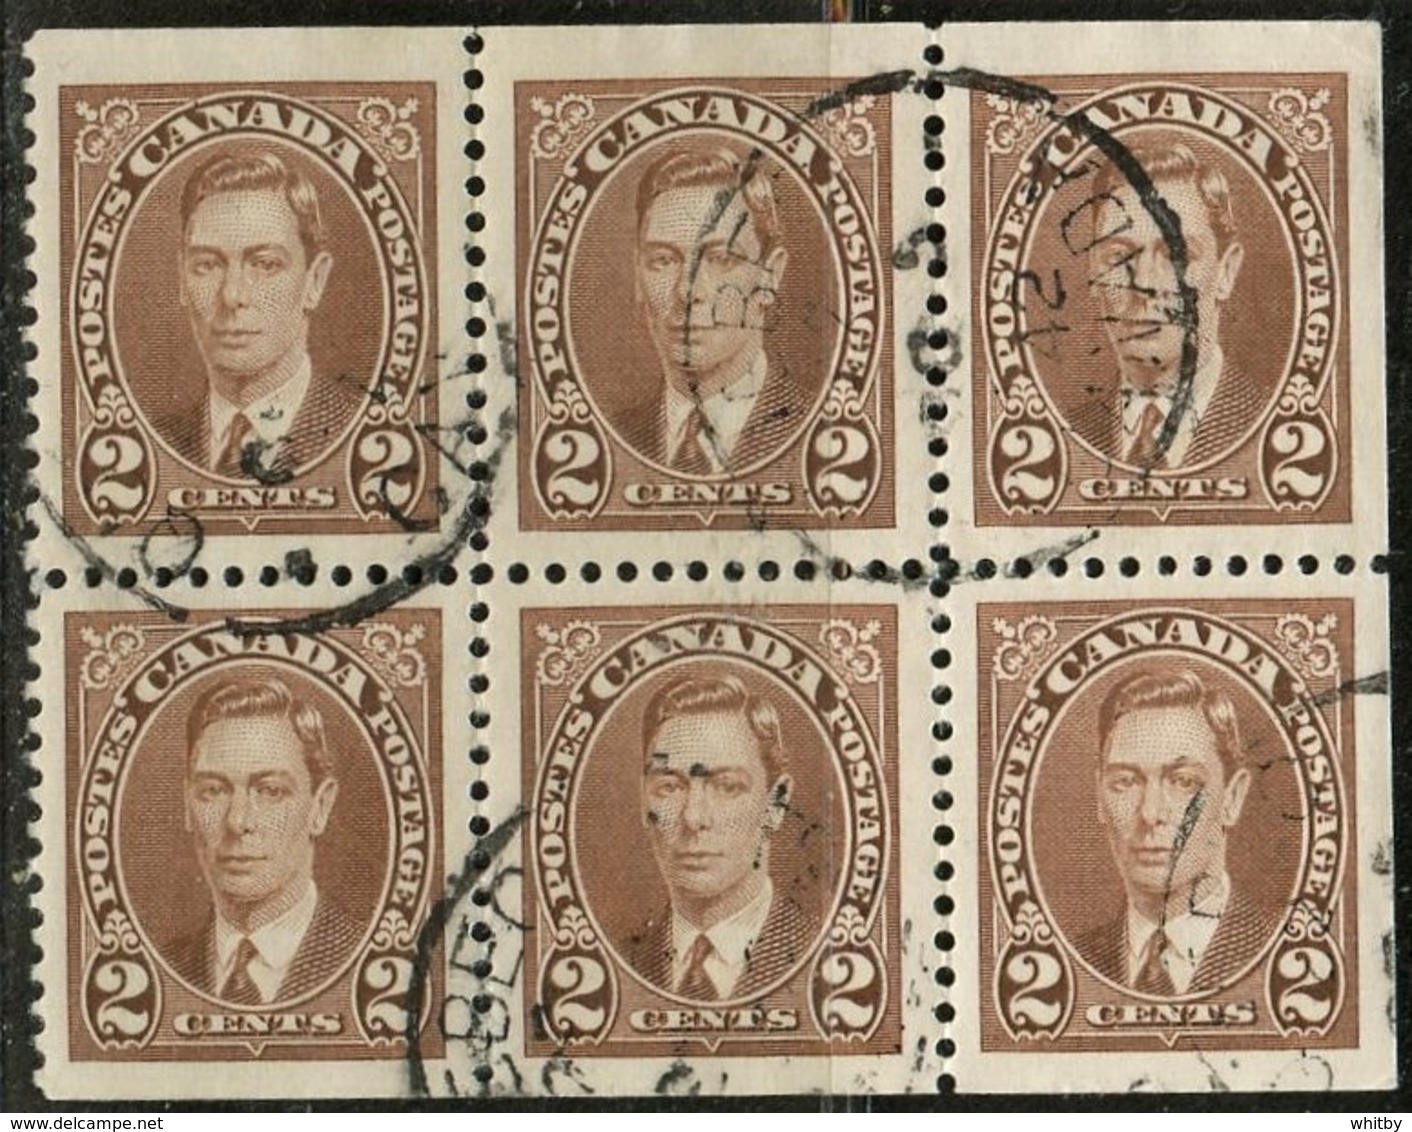 1937 2 Cent King George VI Mufti Issue #232b Booklet Pane Of 6 - Used Stamps